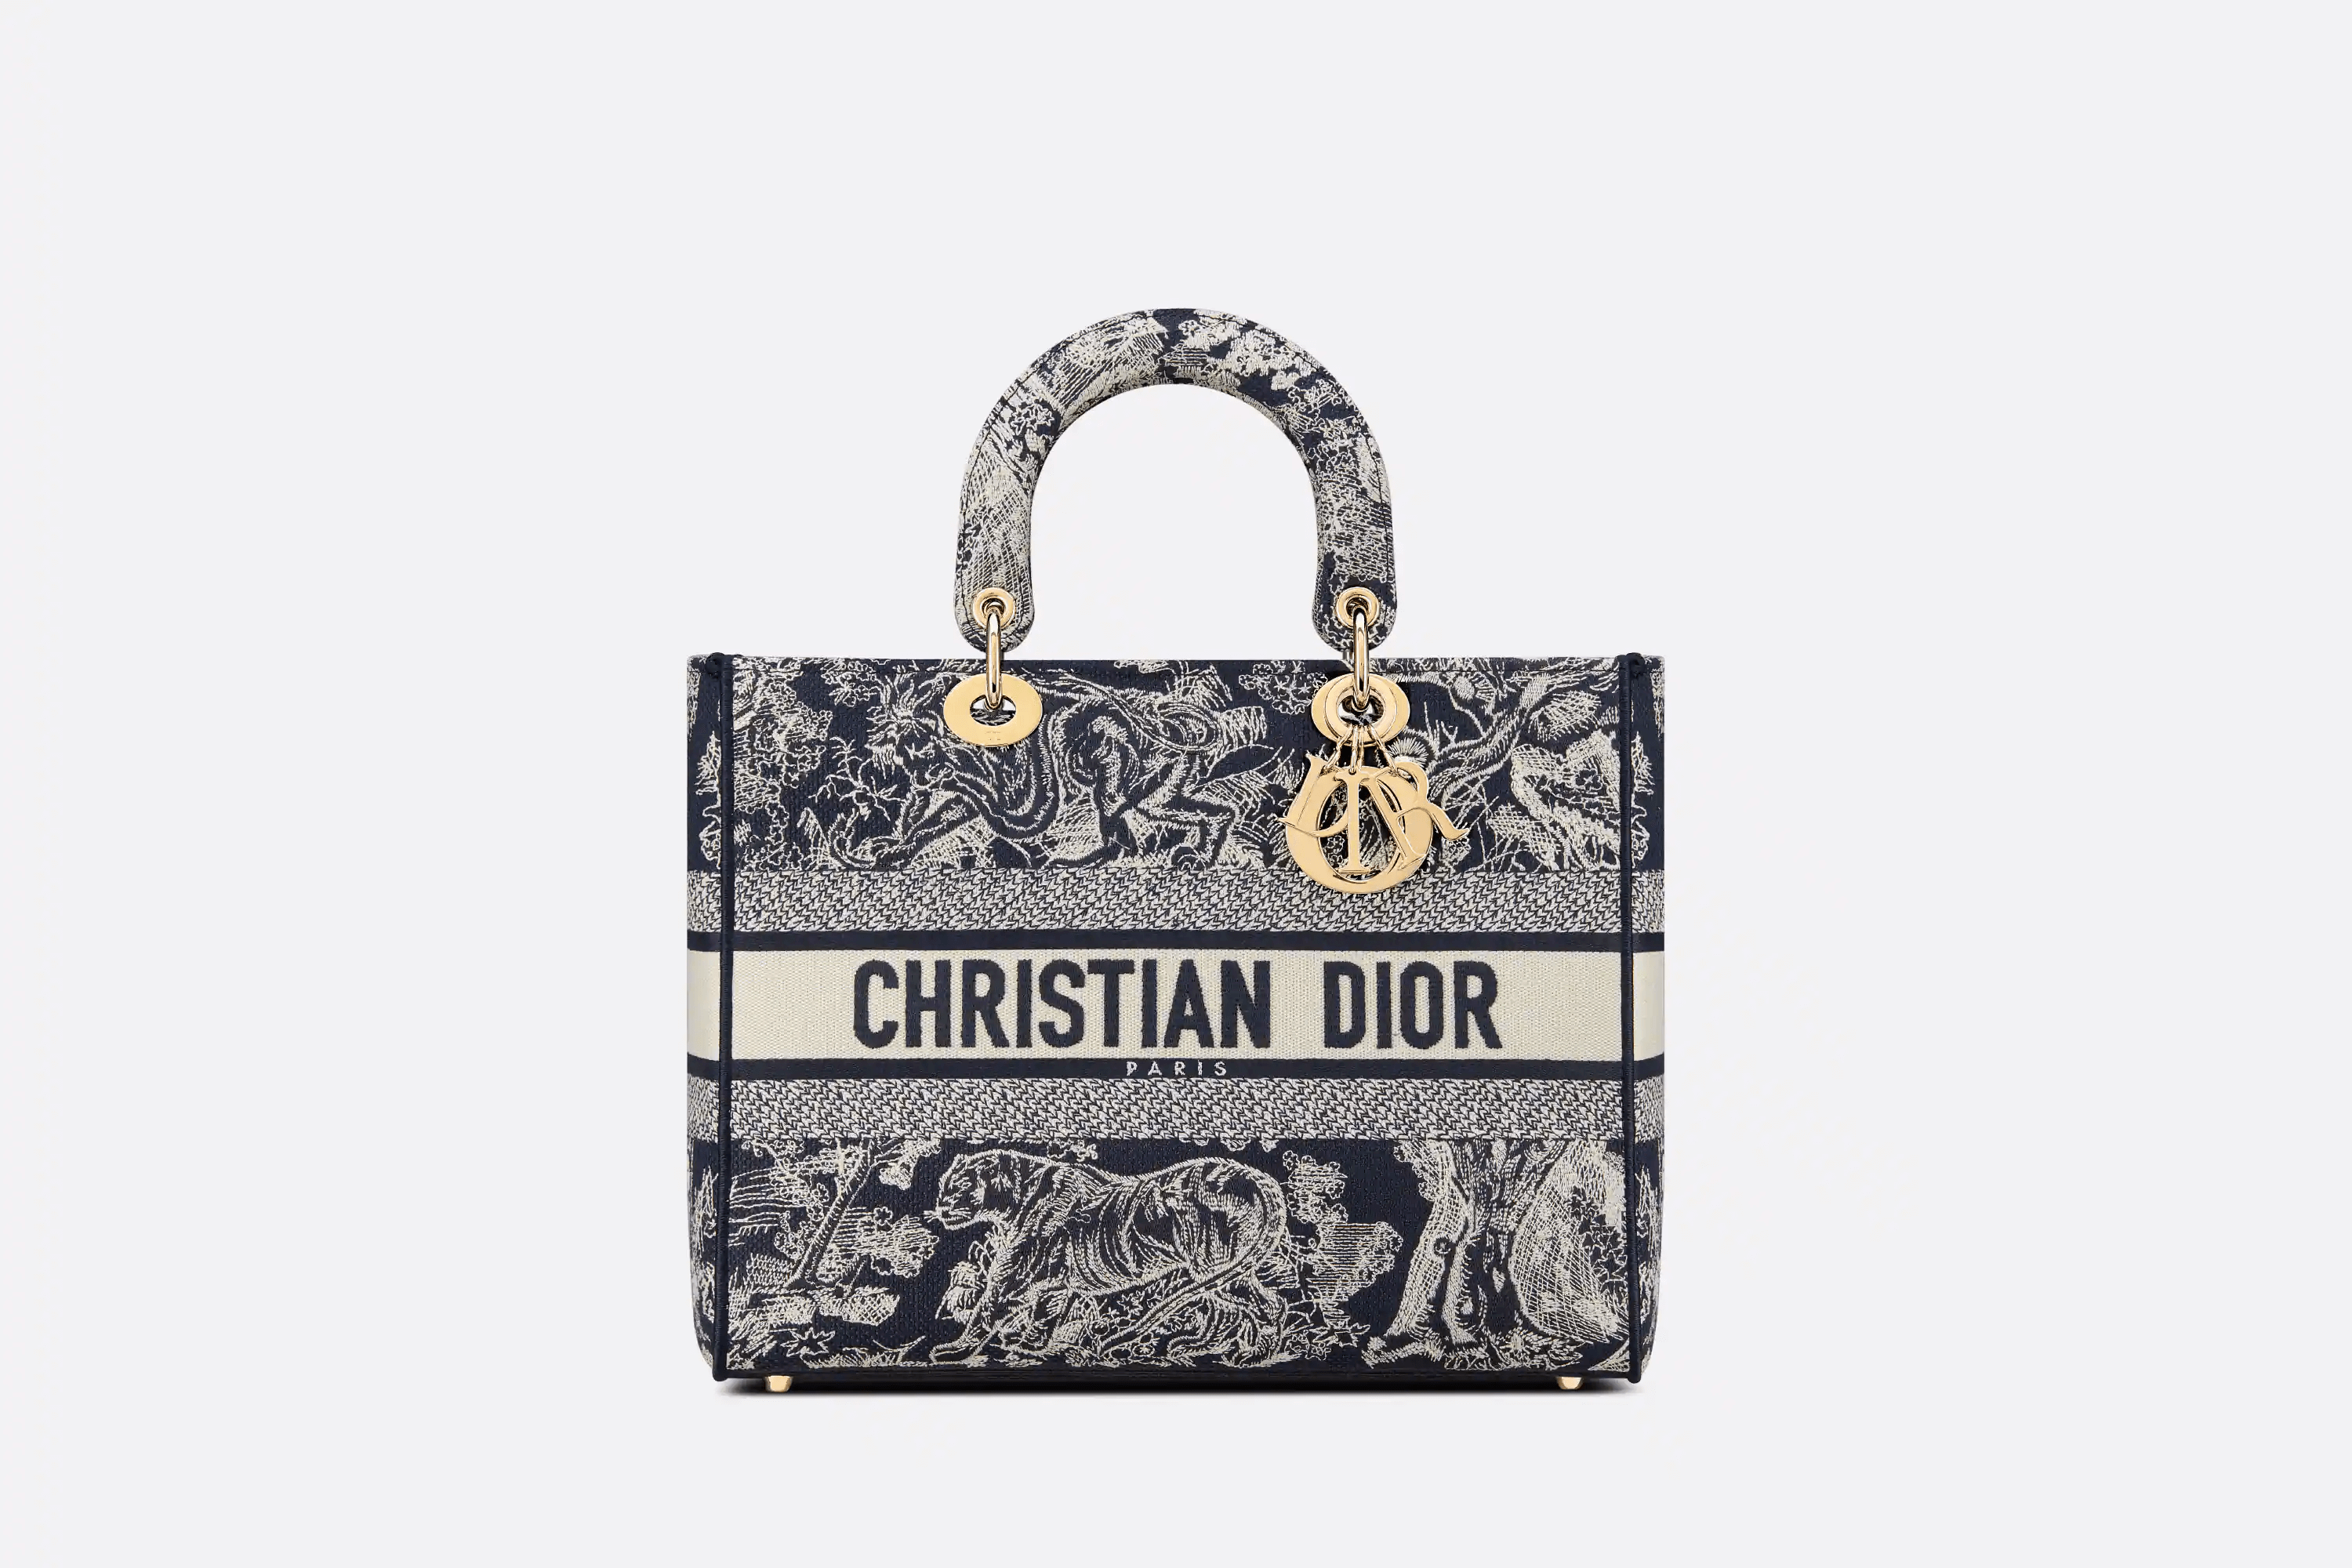 Top 10 Dior Bag Dupes: Affordable Alternatives to Iconic Dior Bags